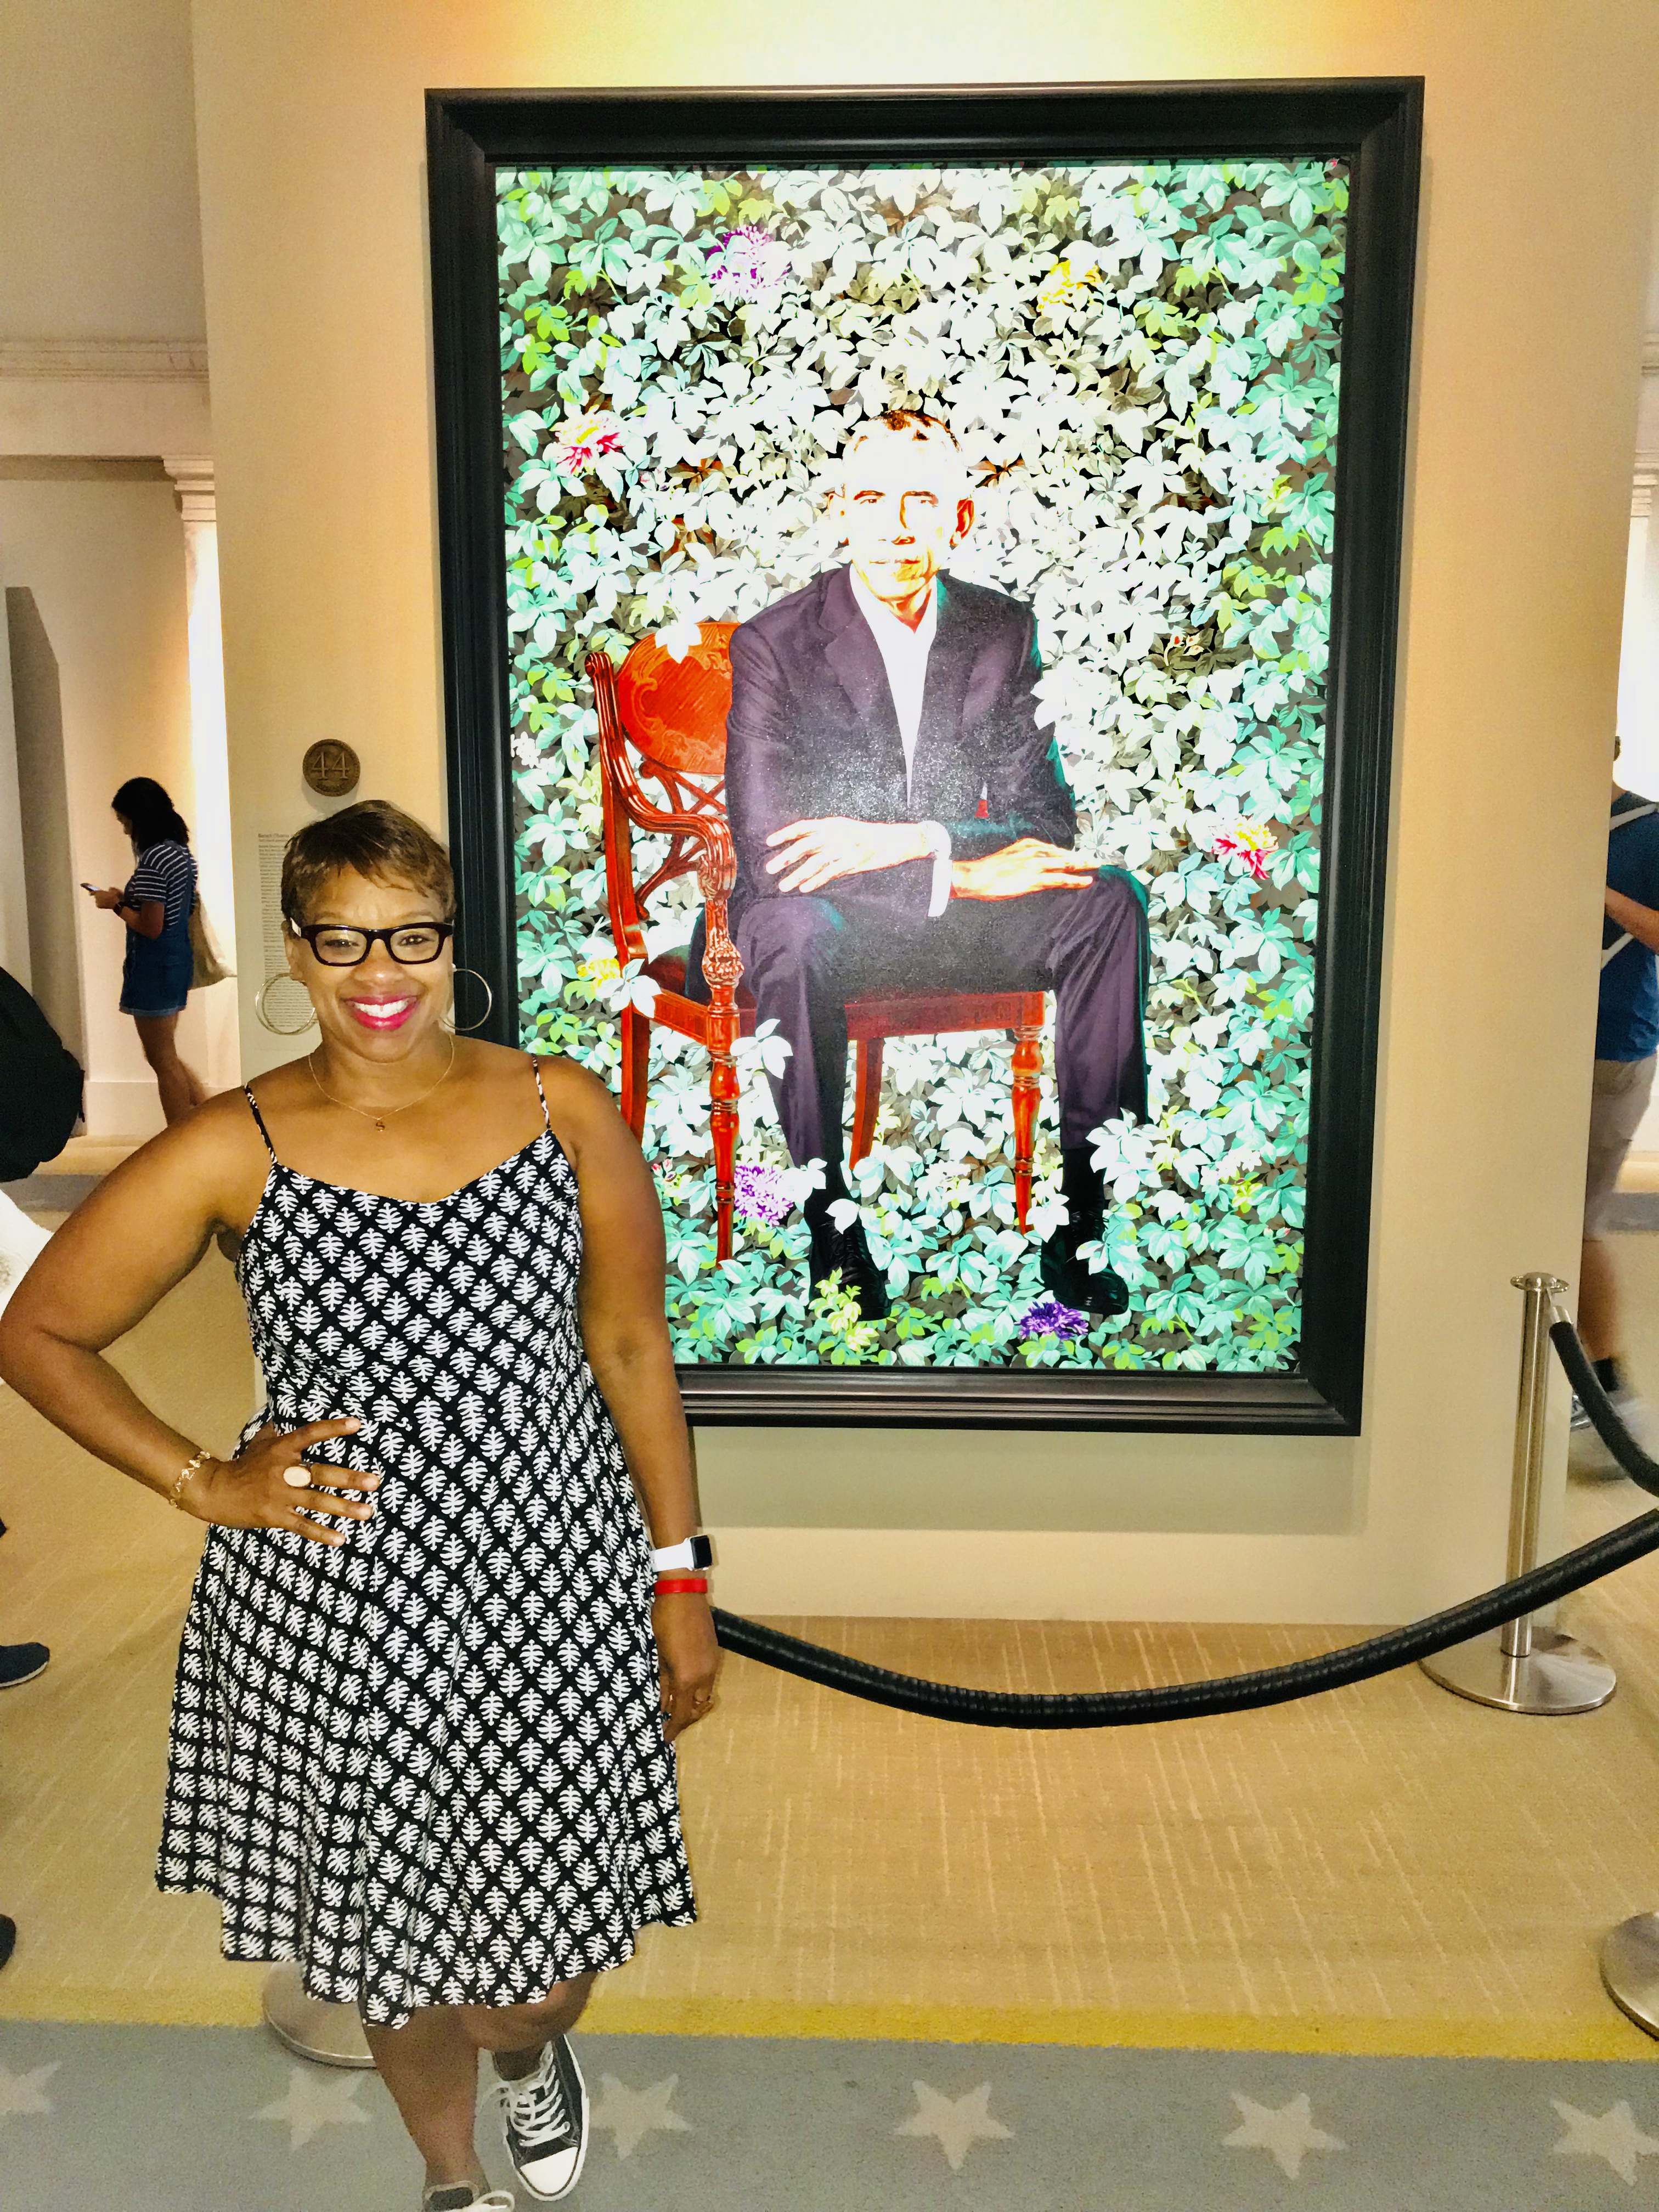 Best Things To Do In DC: Portrait Gallery